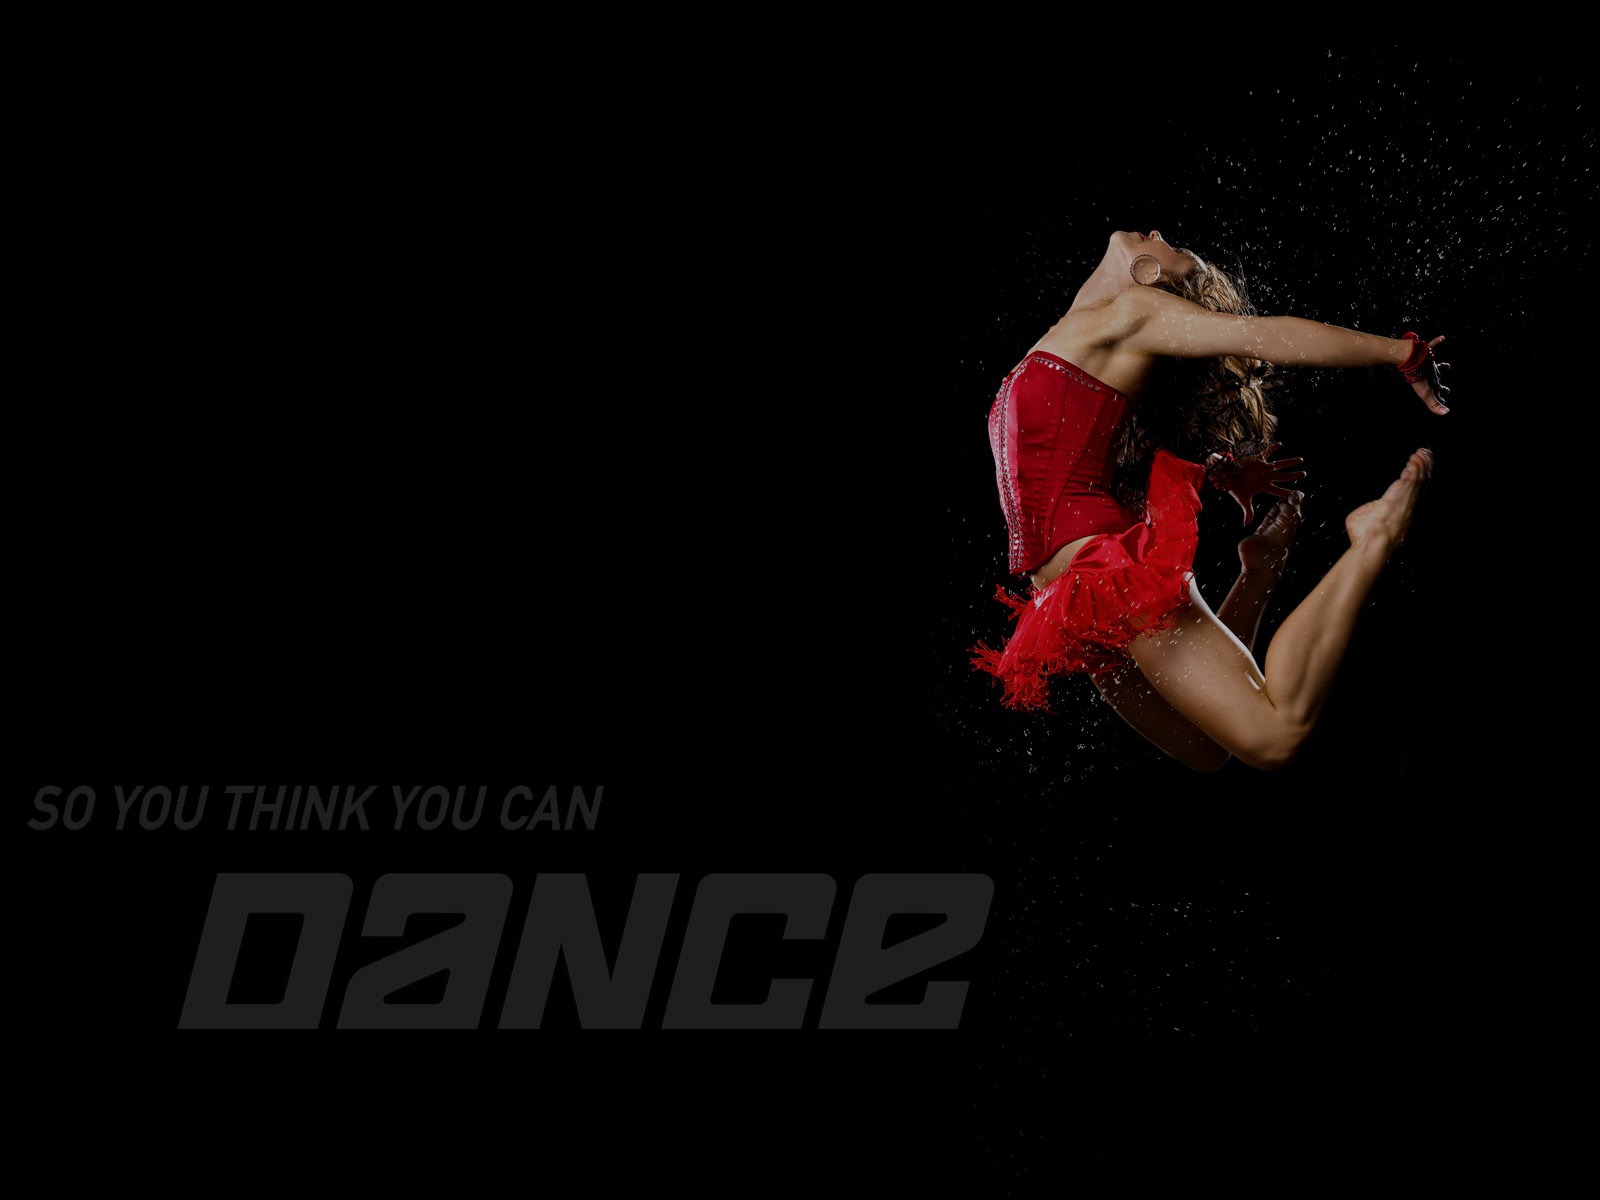 So You Think You Can Dance 舞林爭霸壁紙(二) #1 - 1600x1200